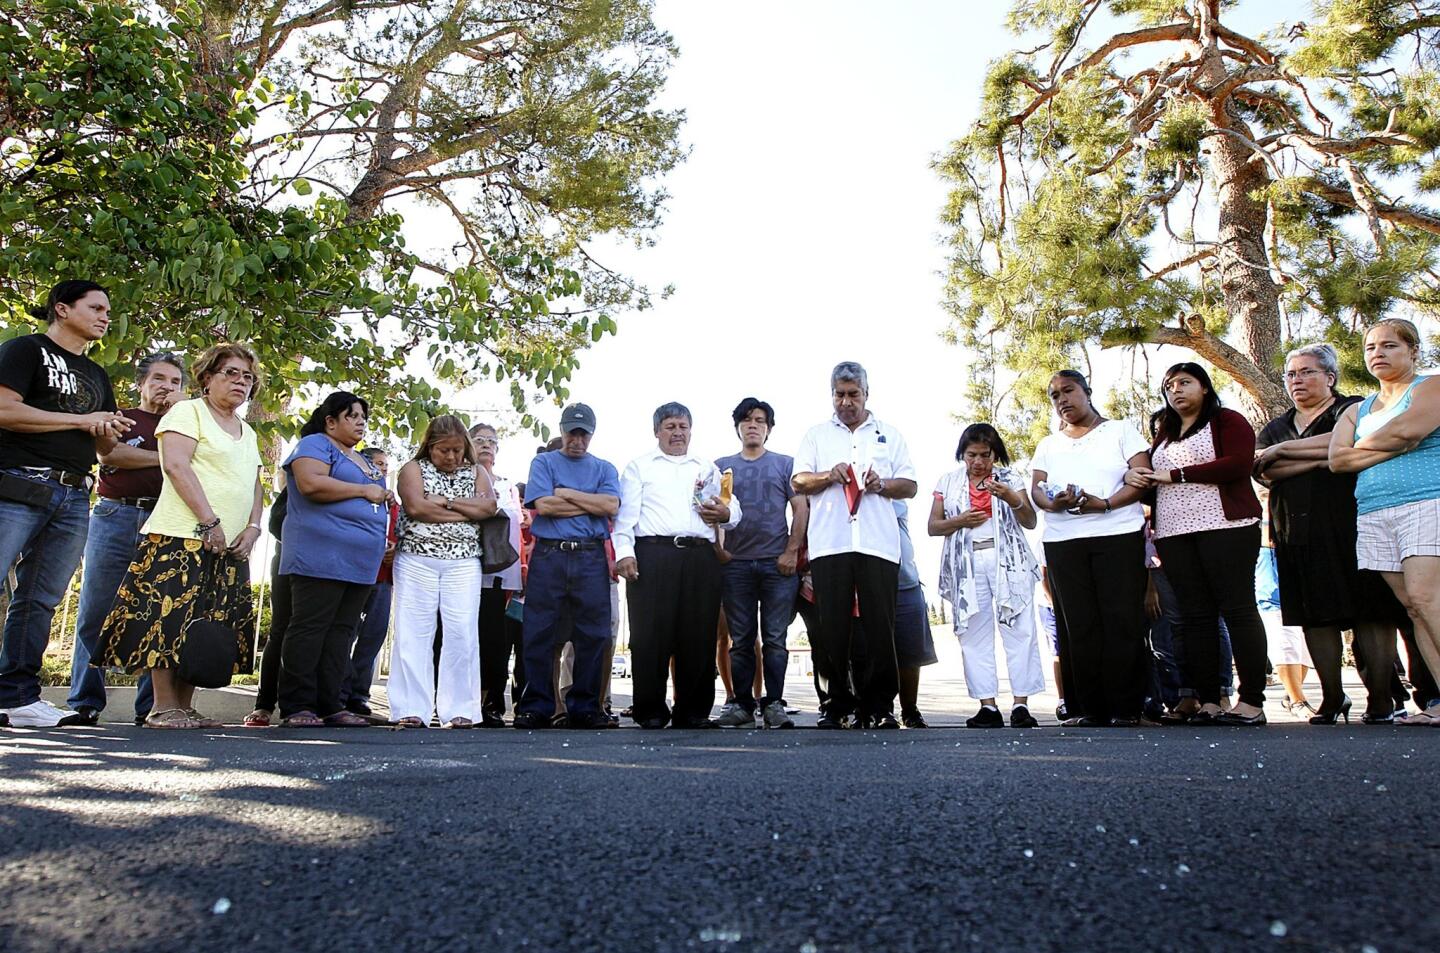 Members of Guardian Angel Parish in Pacoima gather in prayer at the site where a fellow church member, a woman, was shot and killed on Filmore Street in Pacoima.